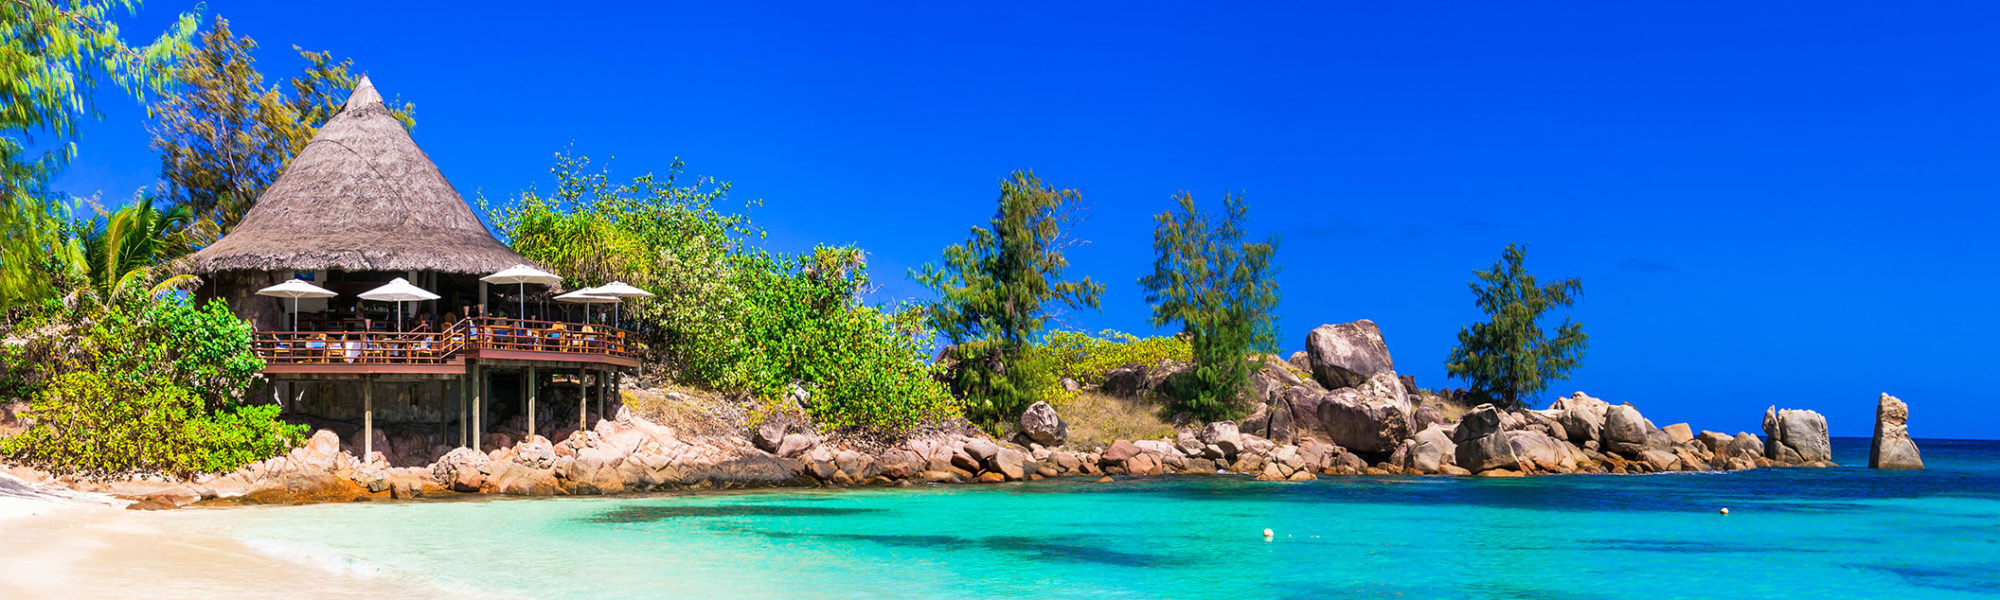 Jaya Travel & Tours with a panorama of the tropical Seychelles island with a cabana and foliage against a sandy beach and brilliant blue ocean.